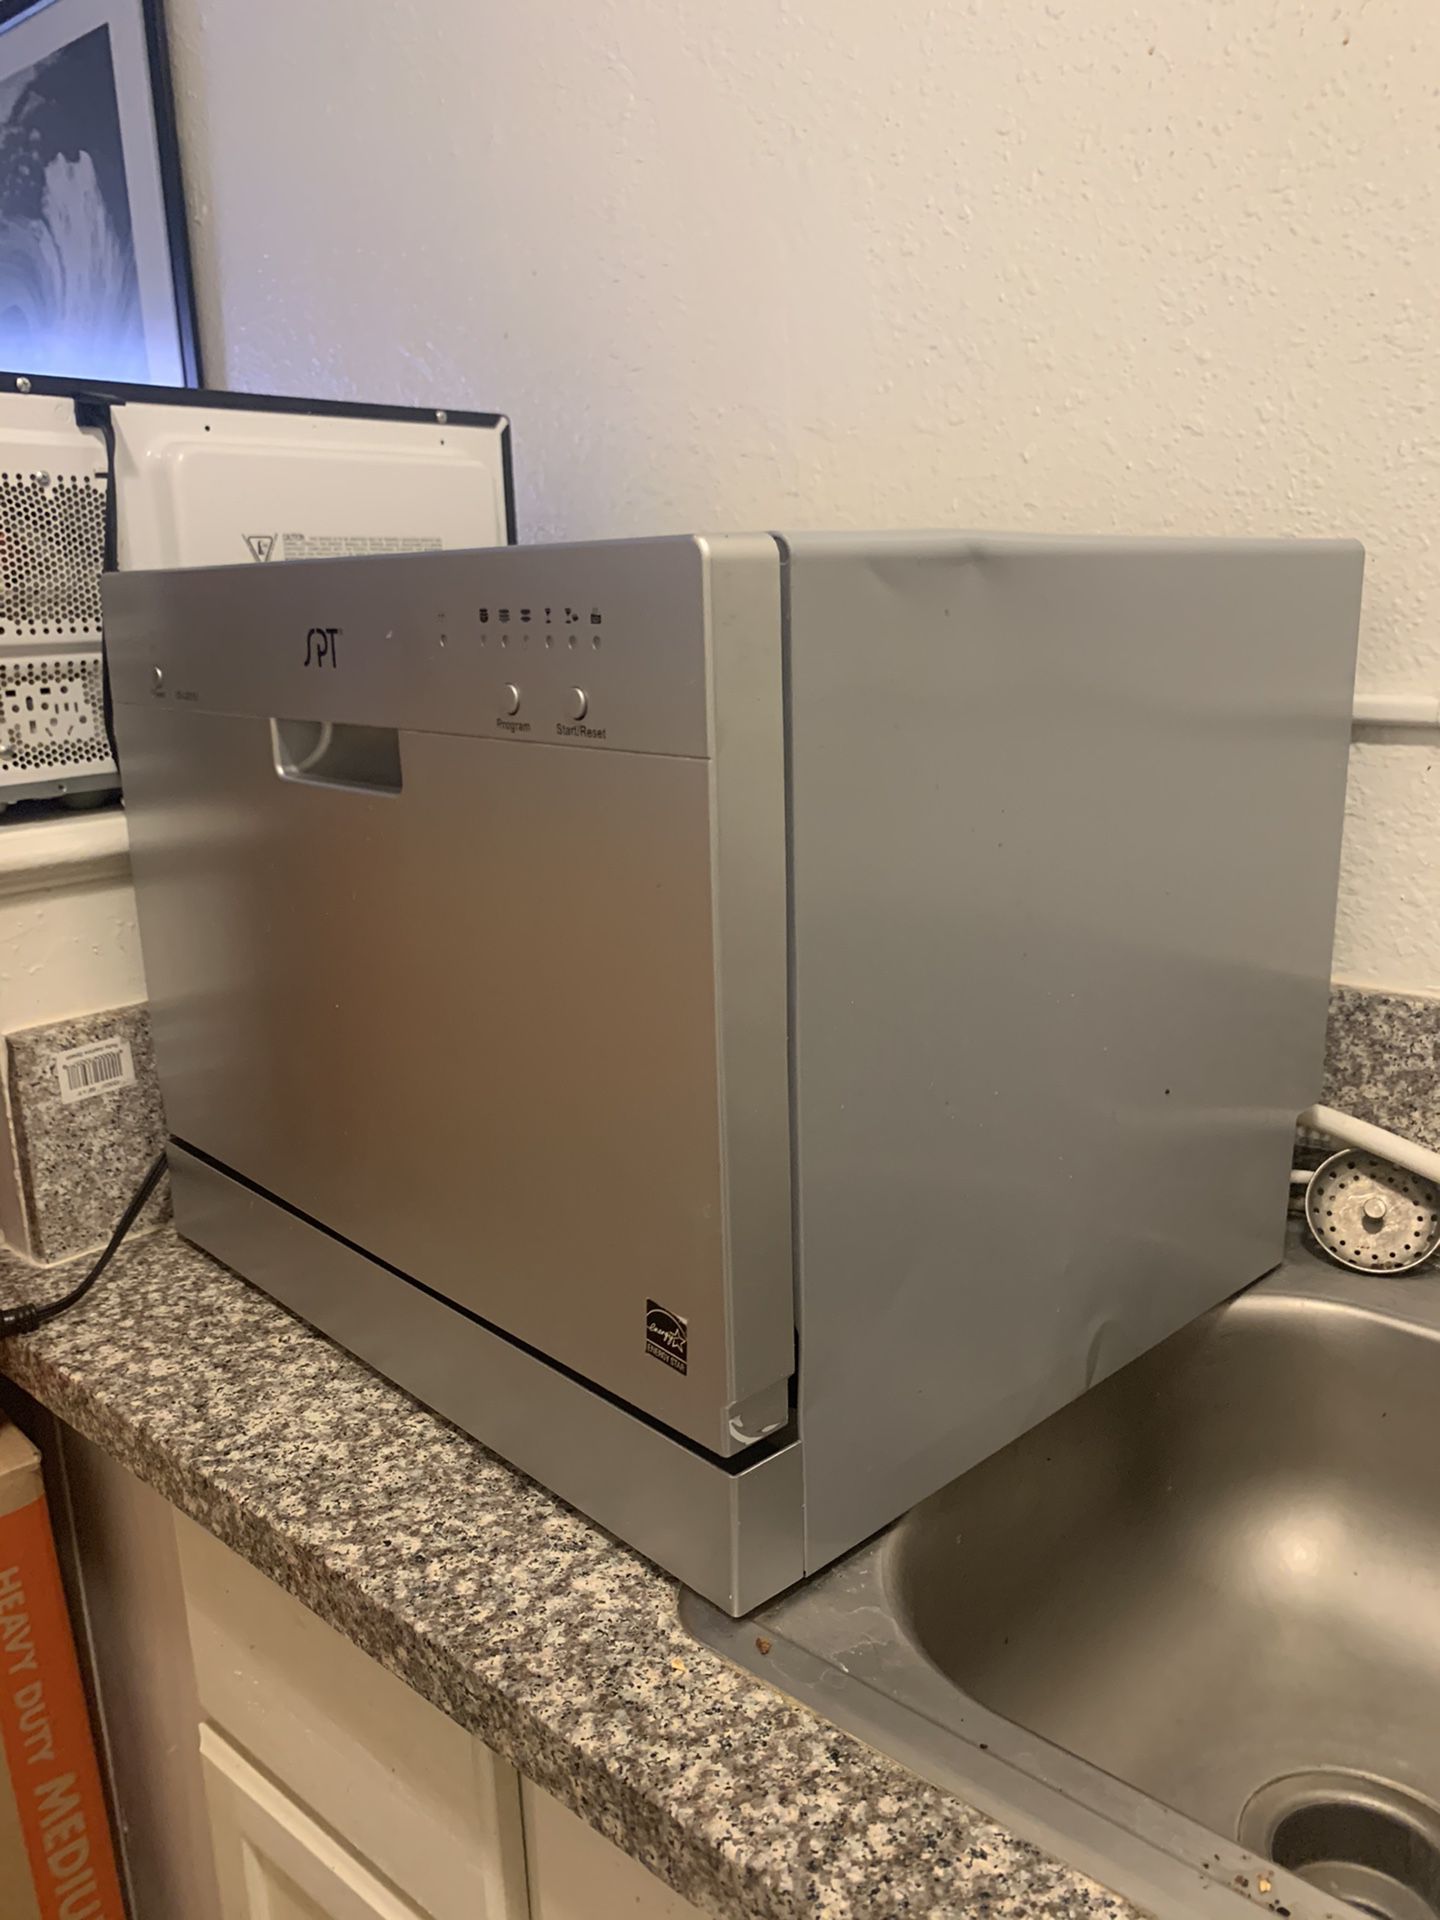 SPT Dishwasher for counter top